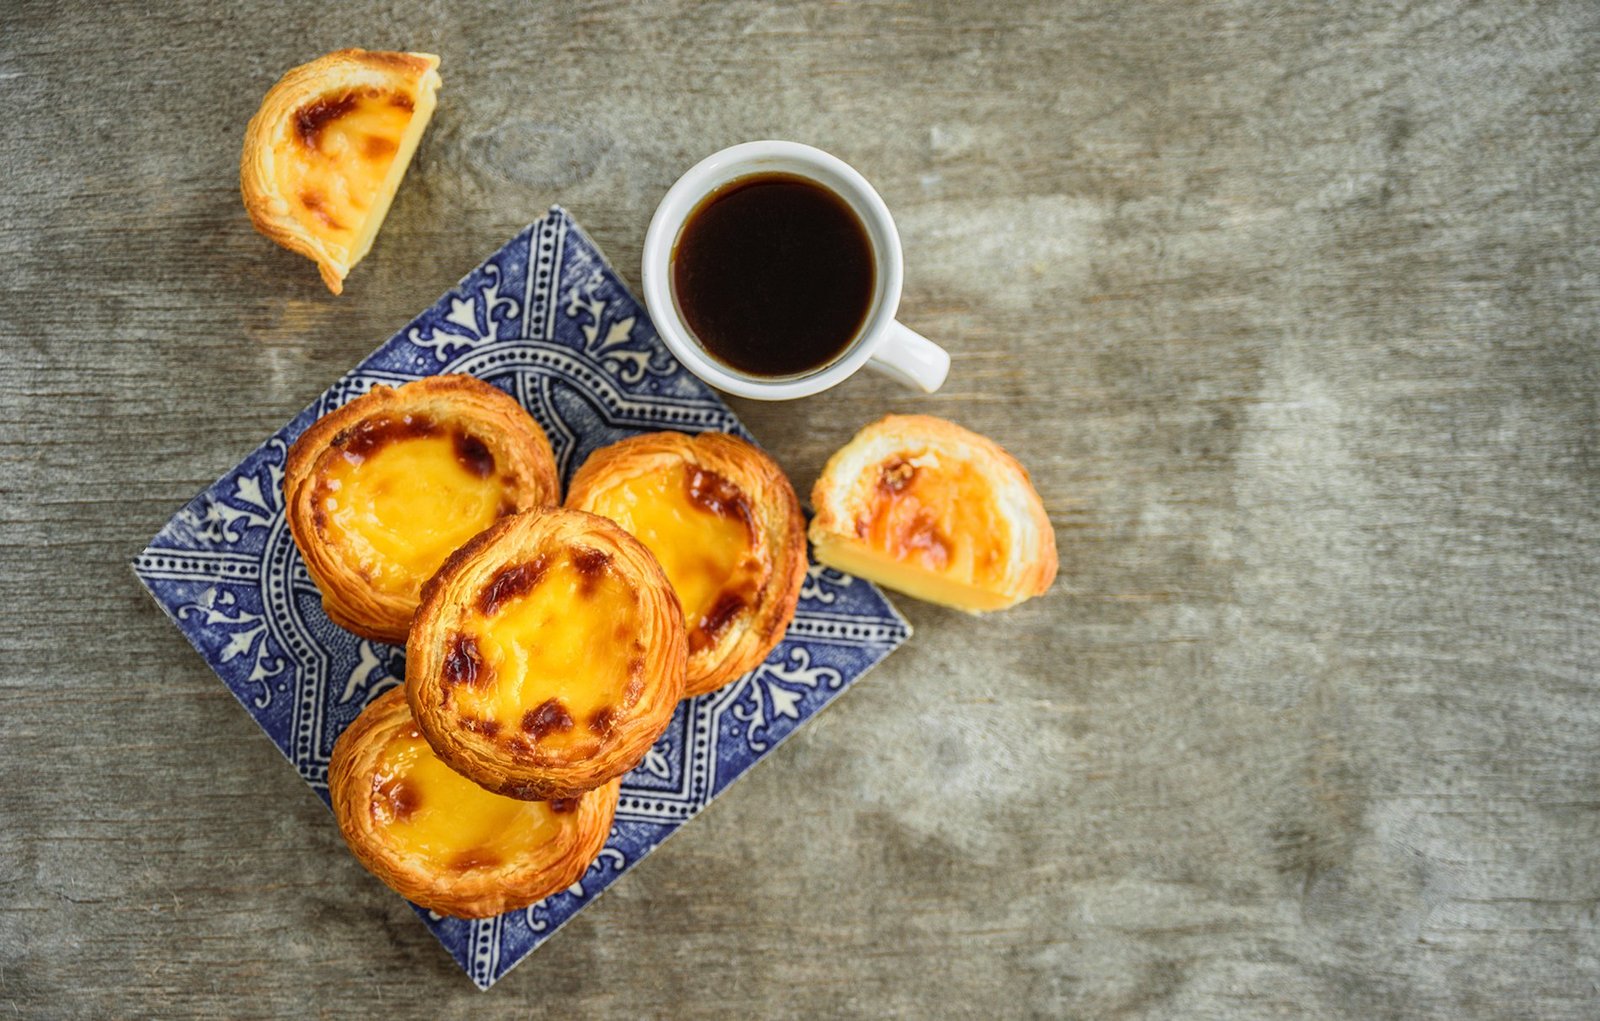 Pastel de Belém and Pastel de Nata are considered the best pastries in the world.